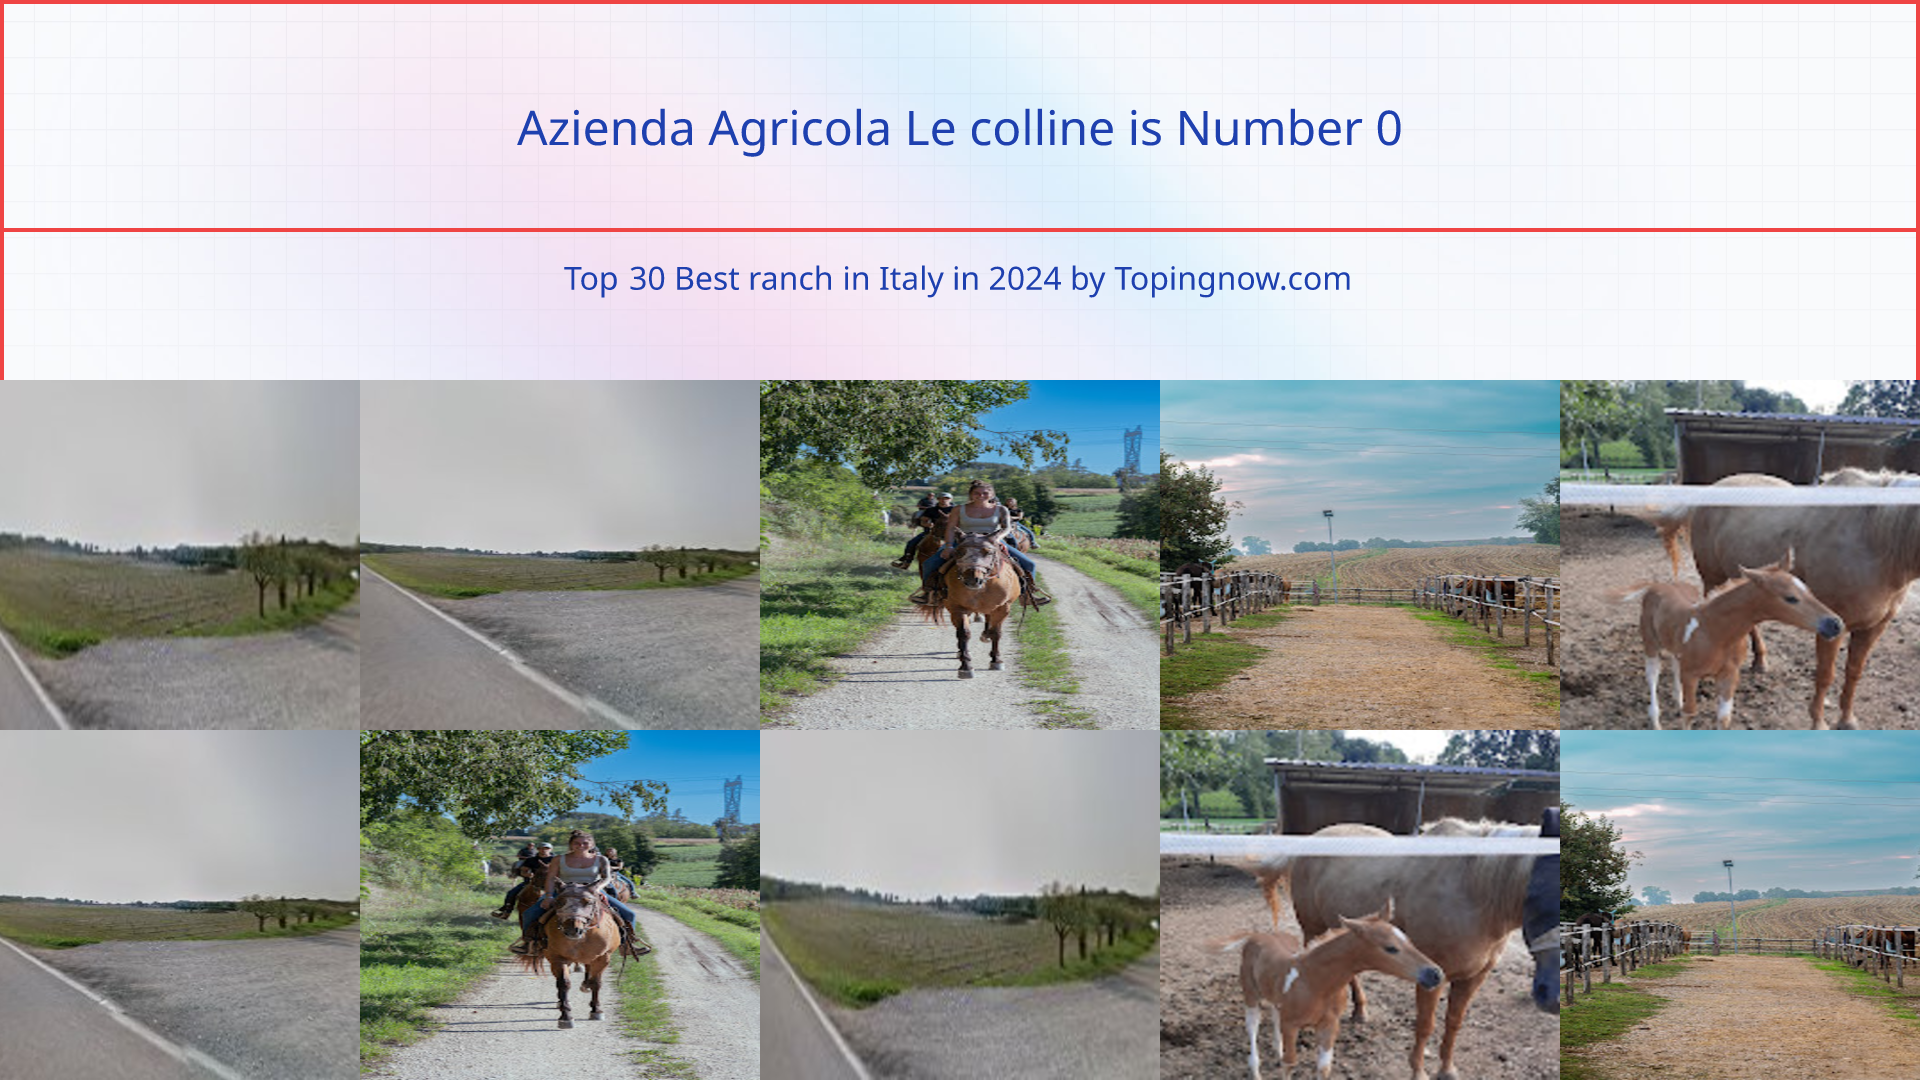 Azienda Agricola Le colline: Top 30 Best ranch in Italy in 2024